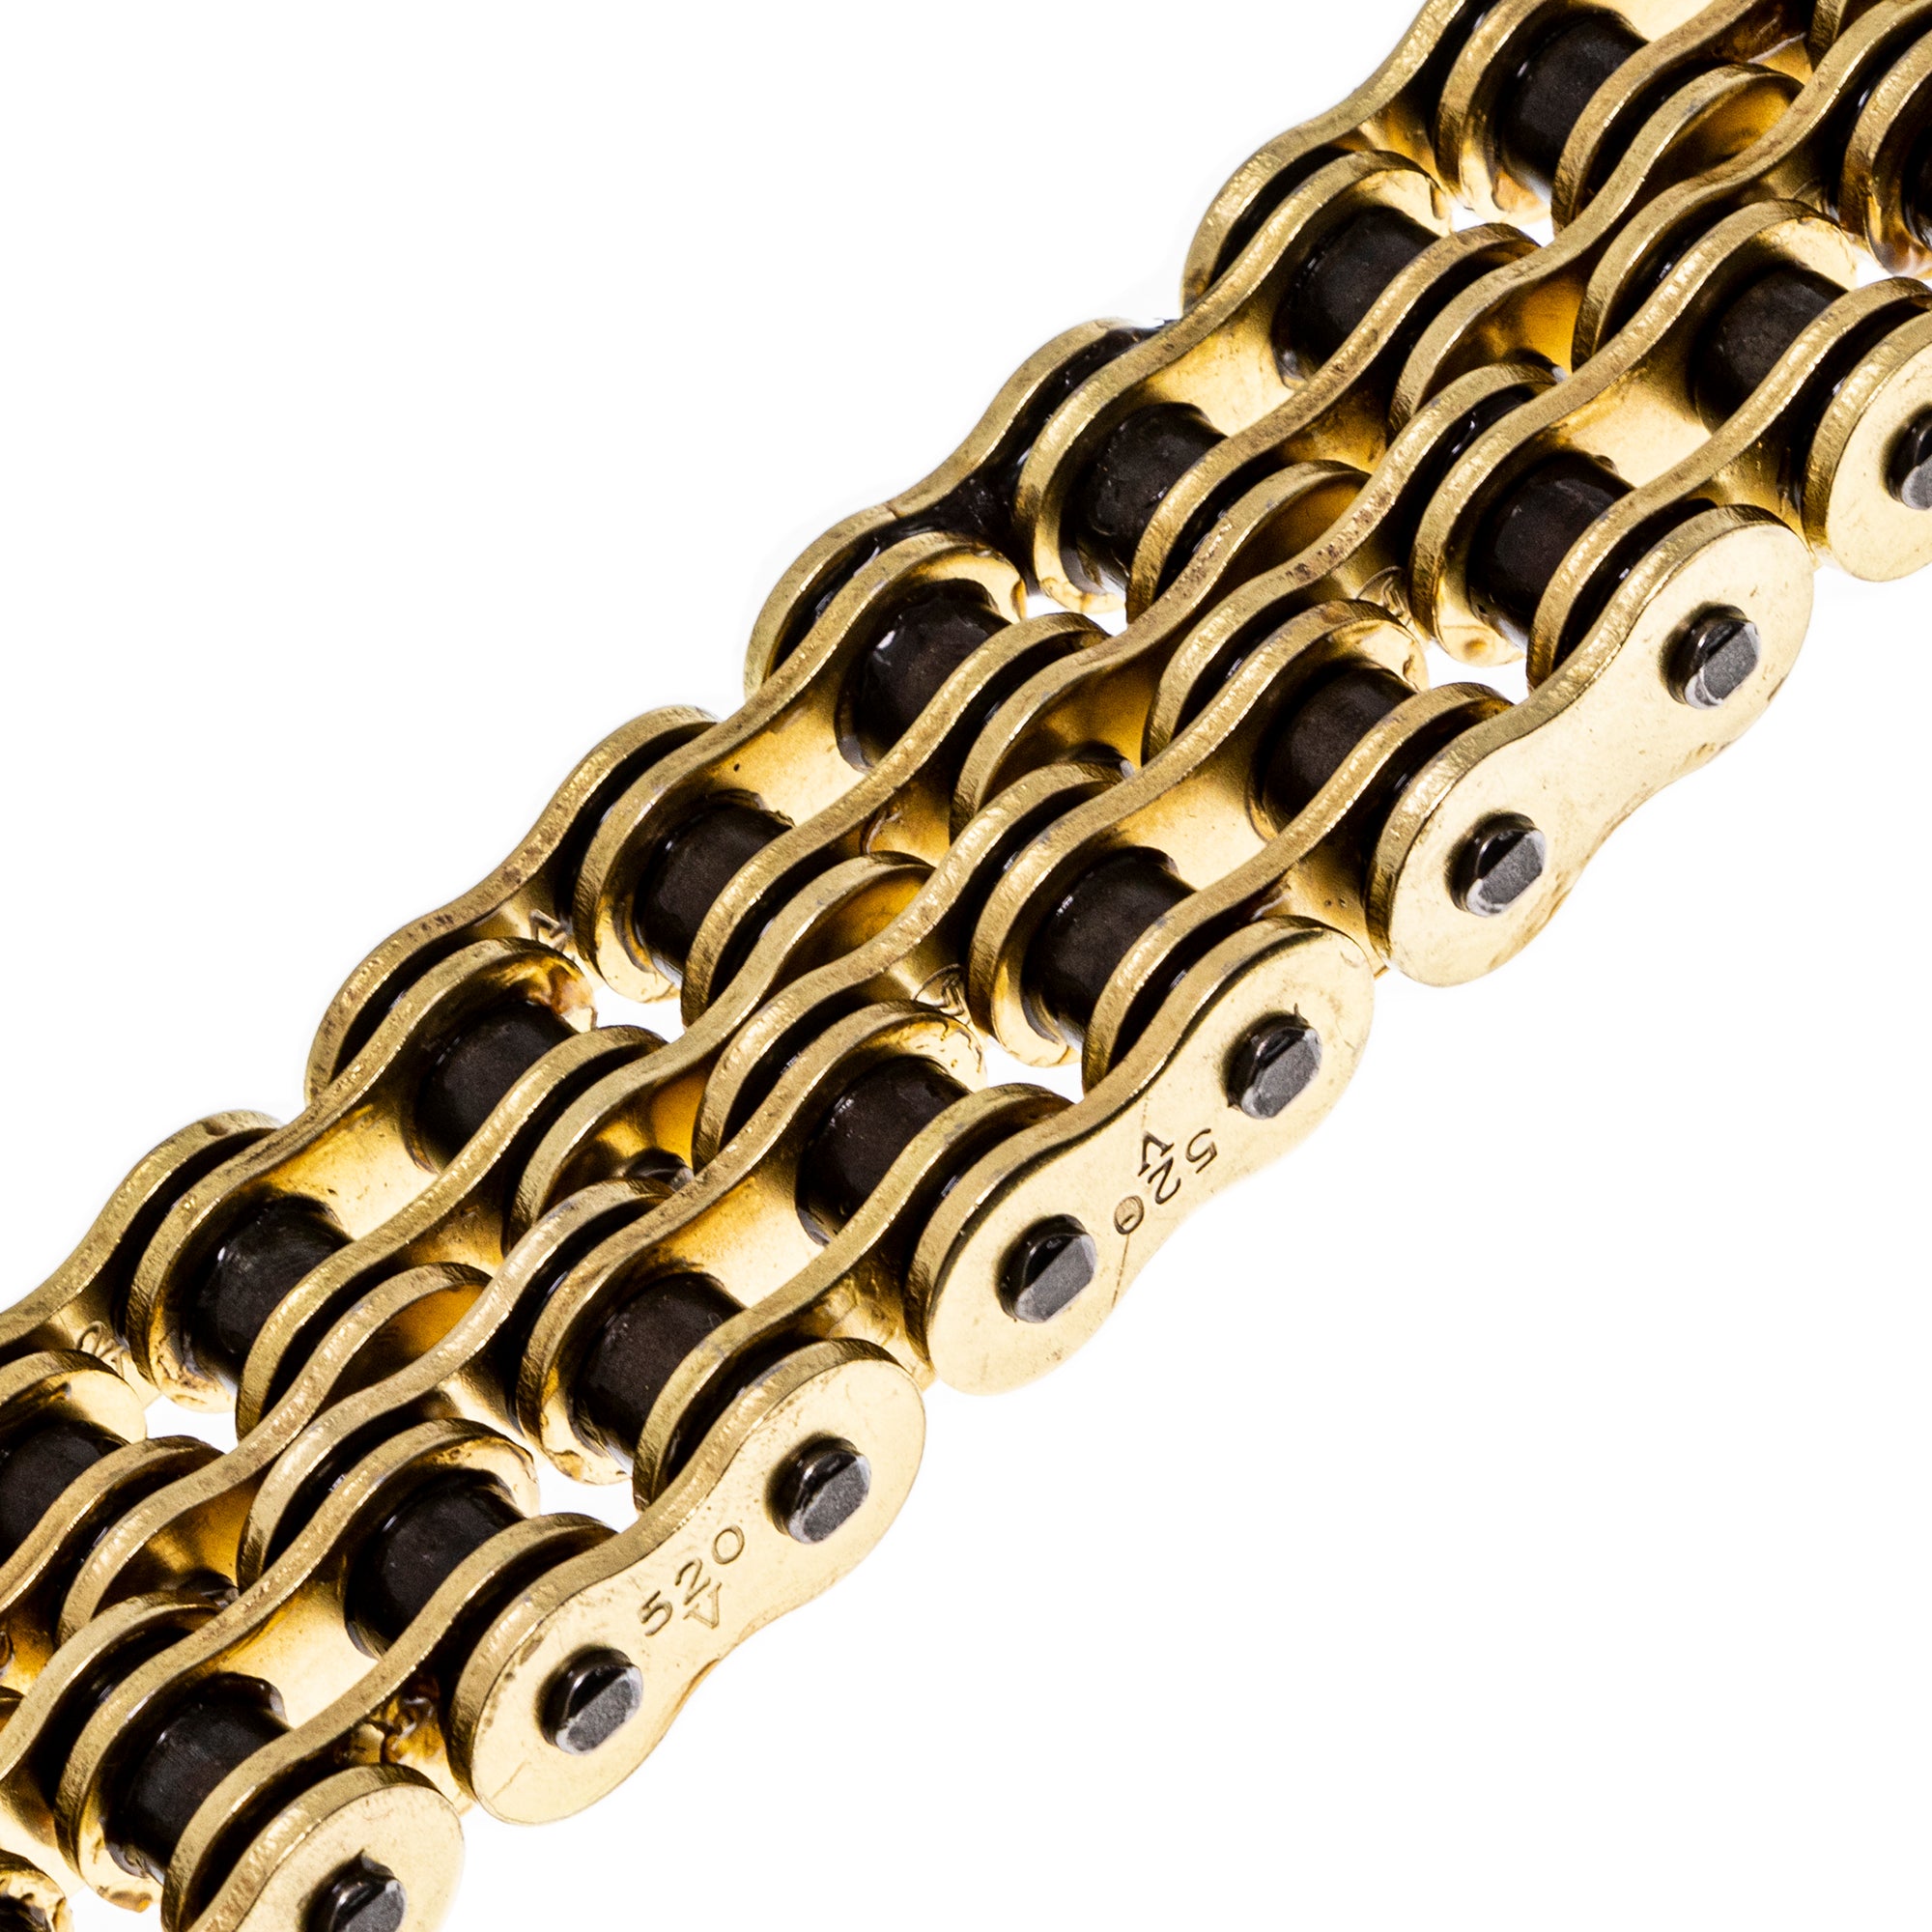 Gold X-Ring Chain 70 w/ Master Link 519-CDC2417H For Polaris